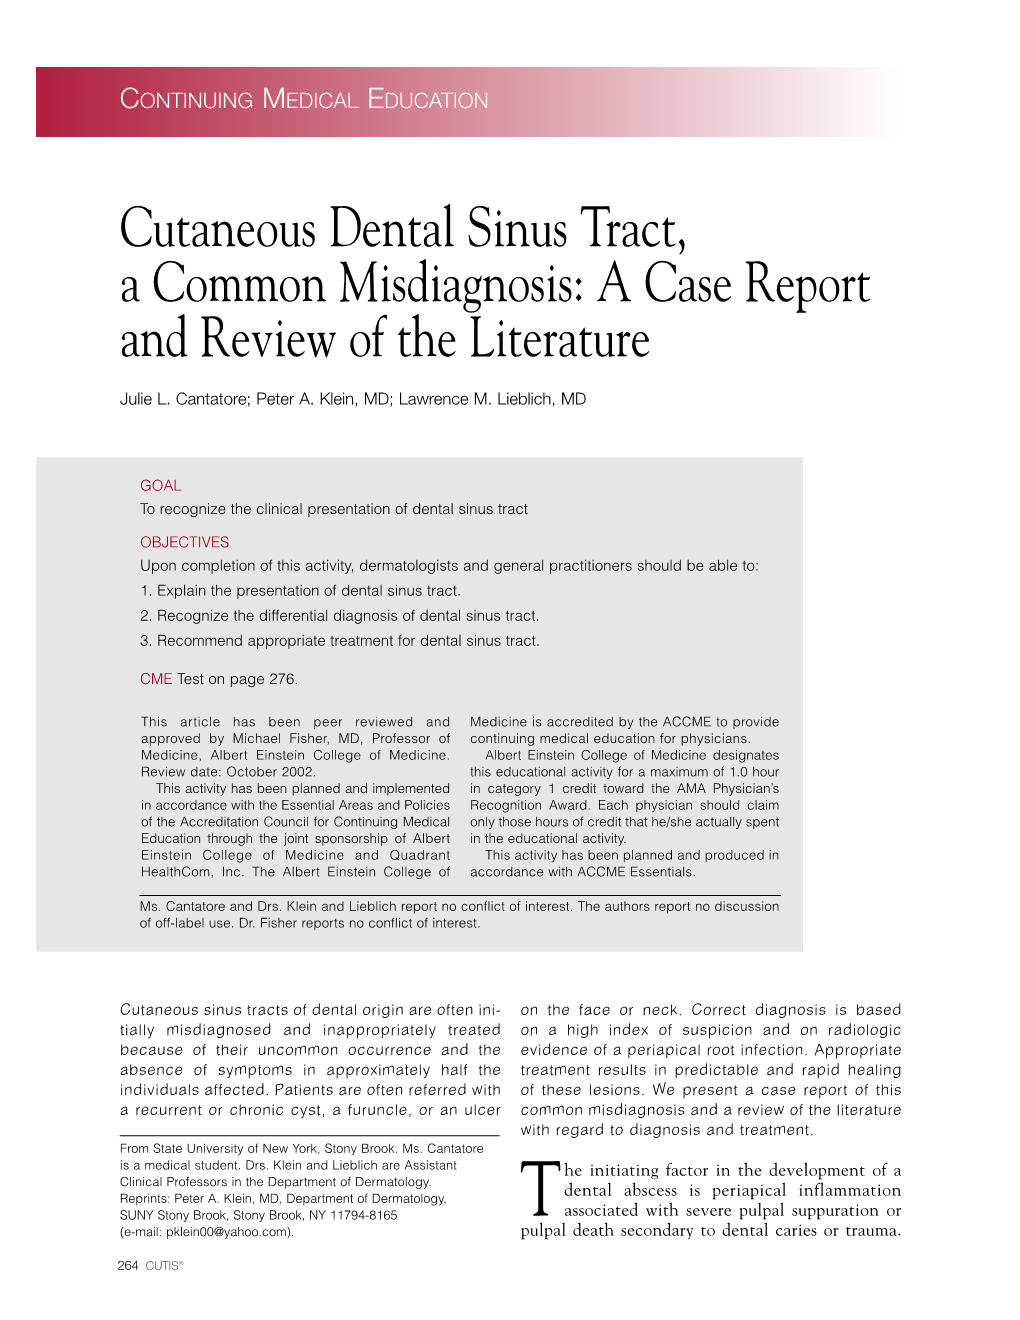 Cutaneous Dental Sinus Tract, a Common Misdiagnosis: a Case Report and Review of the Literature